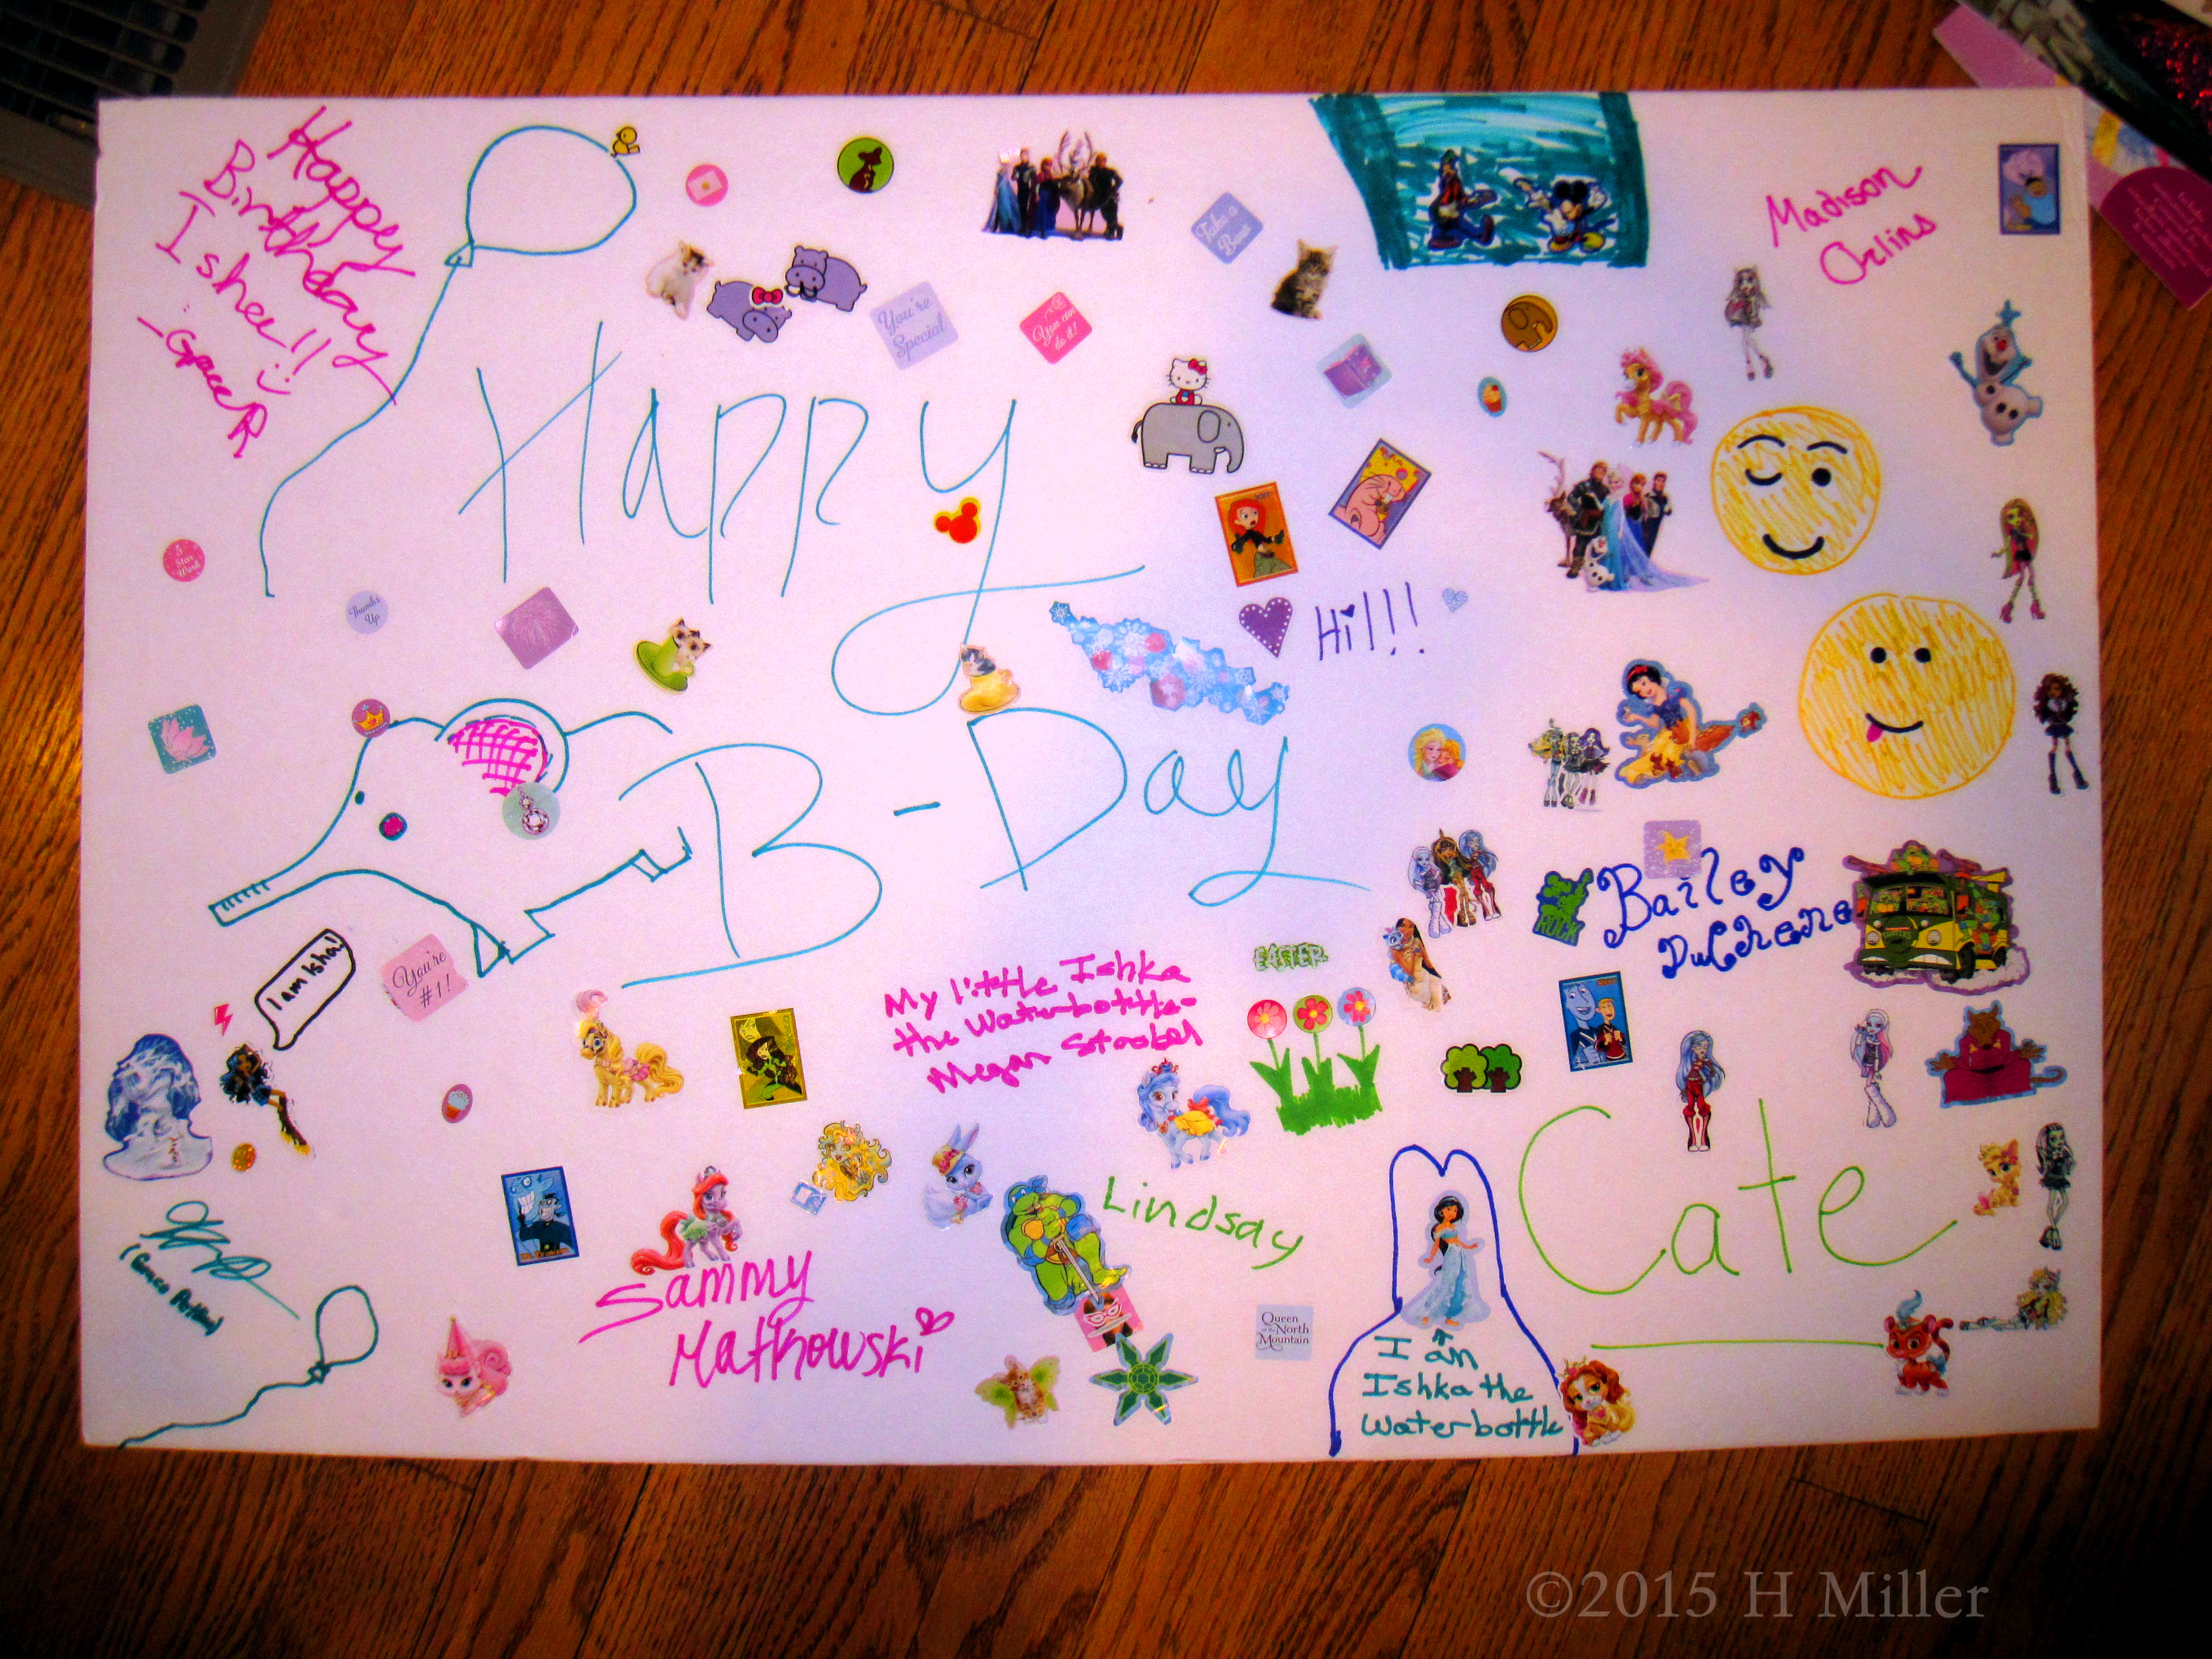 The Birthday Card Designed By Everyone For The Kids Spa Birthday Party 